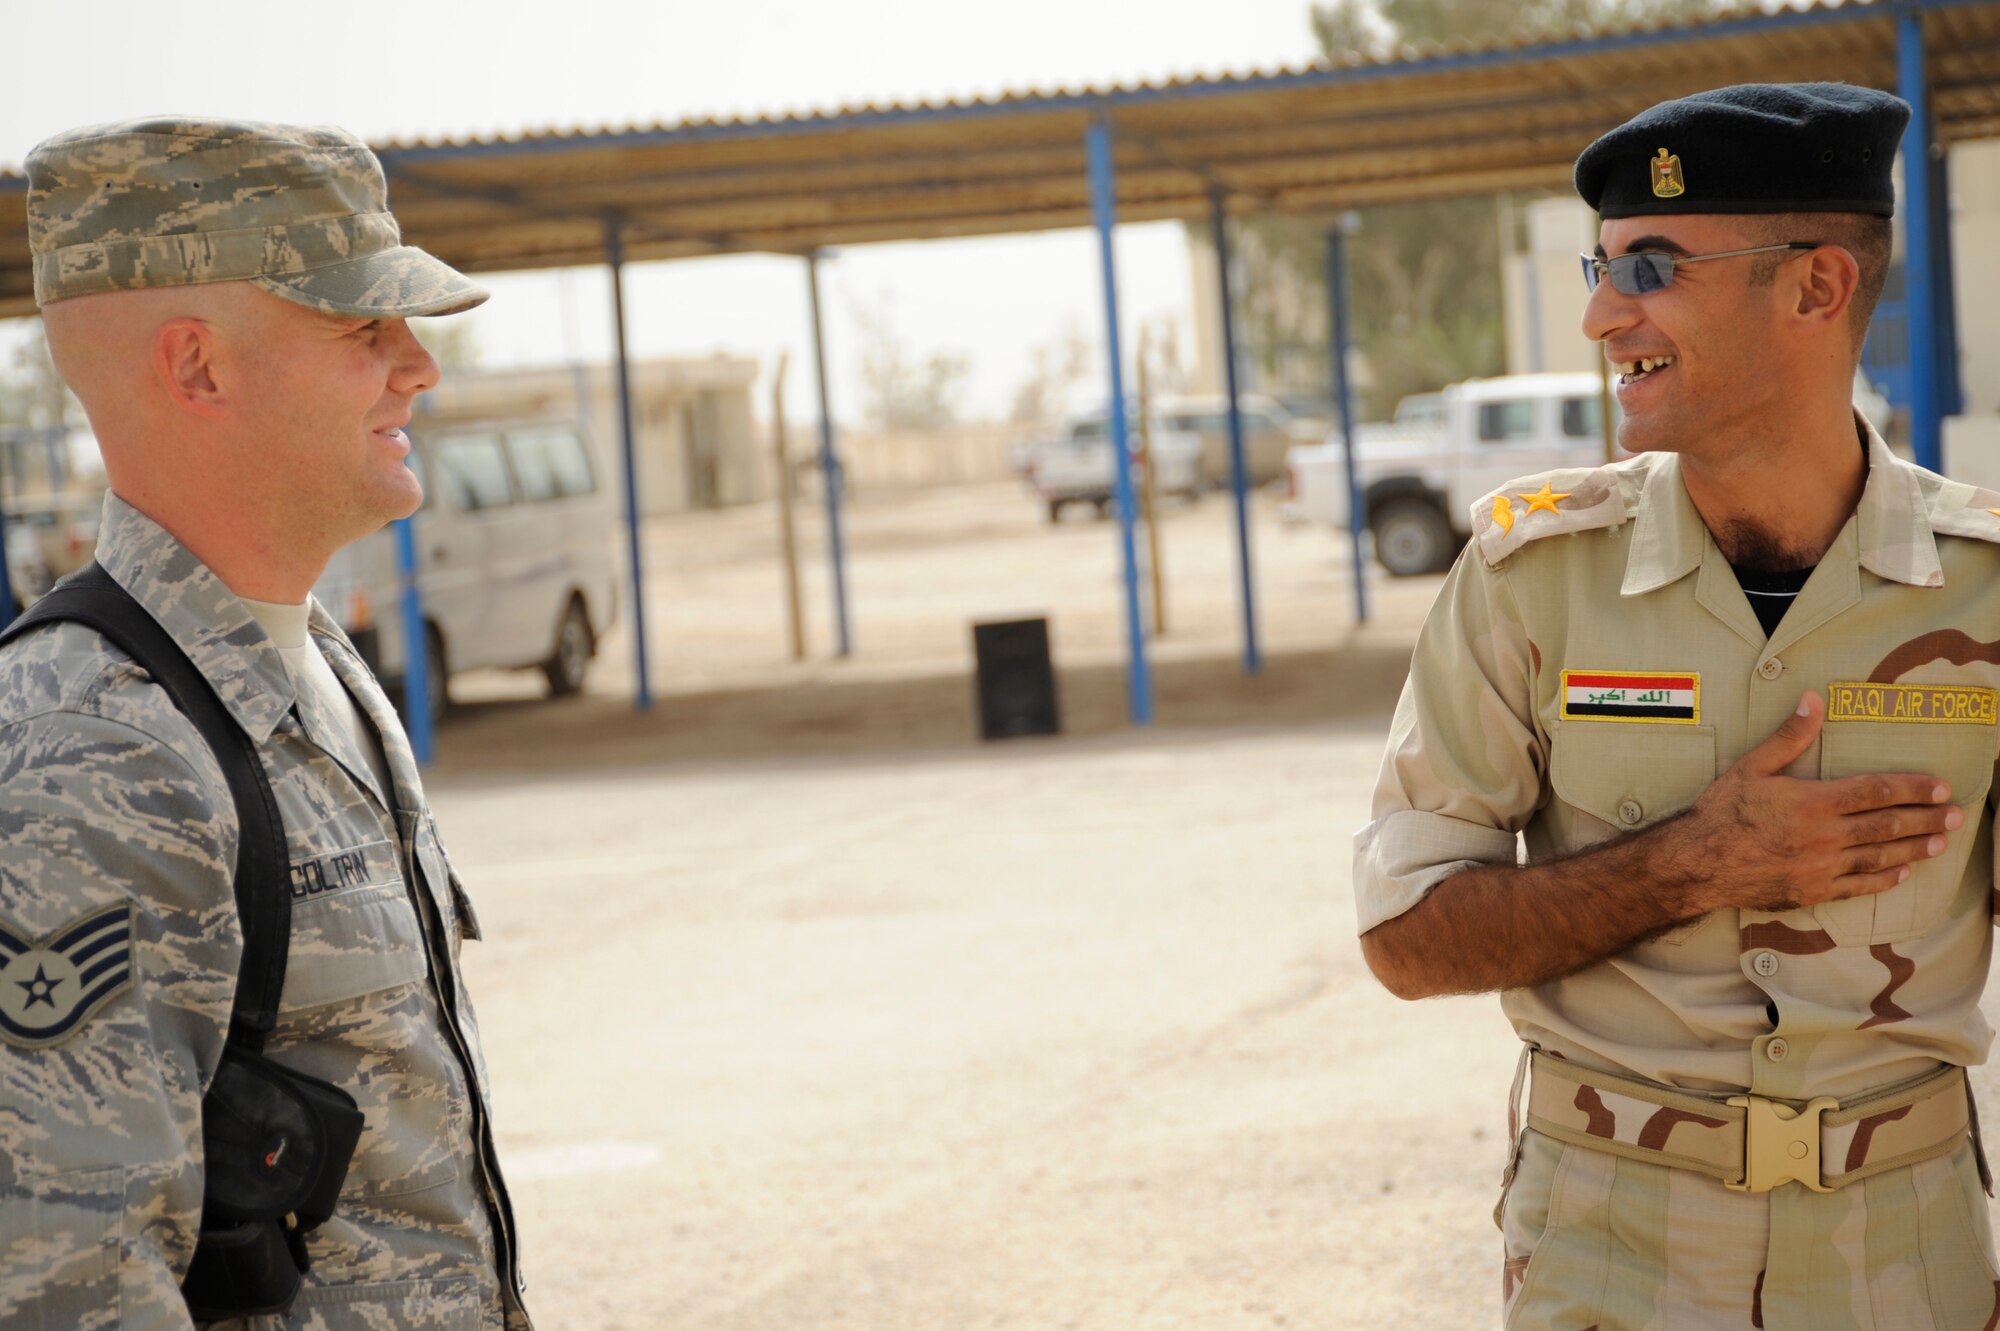 AL TAJI AIR BASE, Iraq -- U.S. Air Force Staff Sgt. Matthew Coltrin, left, a military training instructor air advisor with the 370th Expeditionary Training Squadron, talks about the training day with Iraqi air force Lt. Layth, a military training instructor, at Al Taji Air Base, Iraq on Sept. 28. Coltrin, a Lake Charles, La. native, advises the Iraqi MTI's on how to conduct physical training, dorm set up, drill, and lectures. (U.S. Air Force photo/Staff Sgt. Paul Villanueva II)